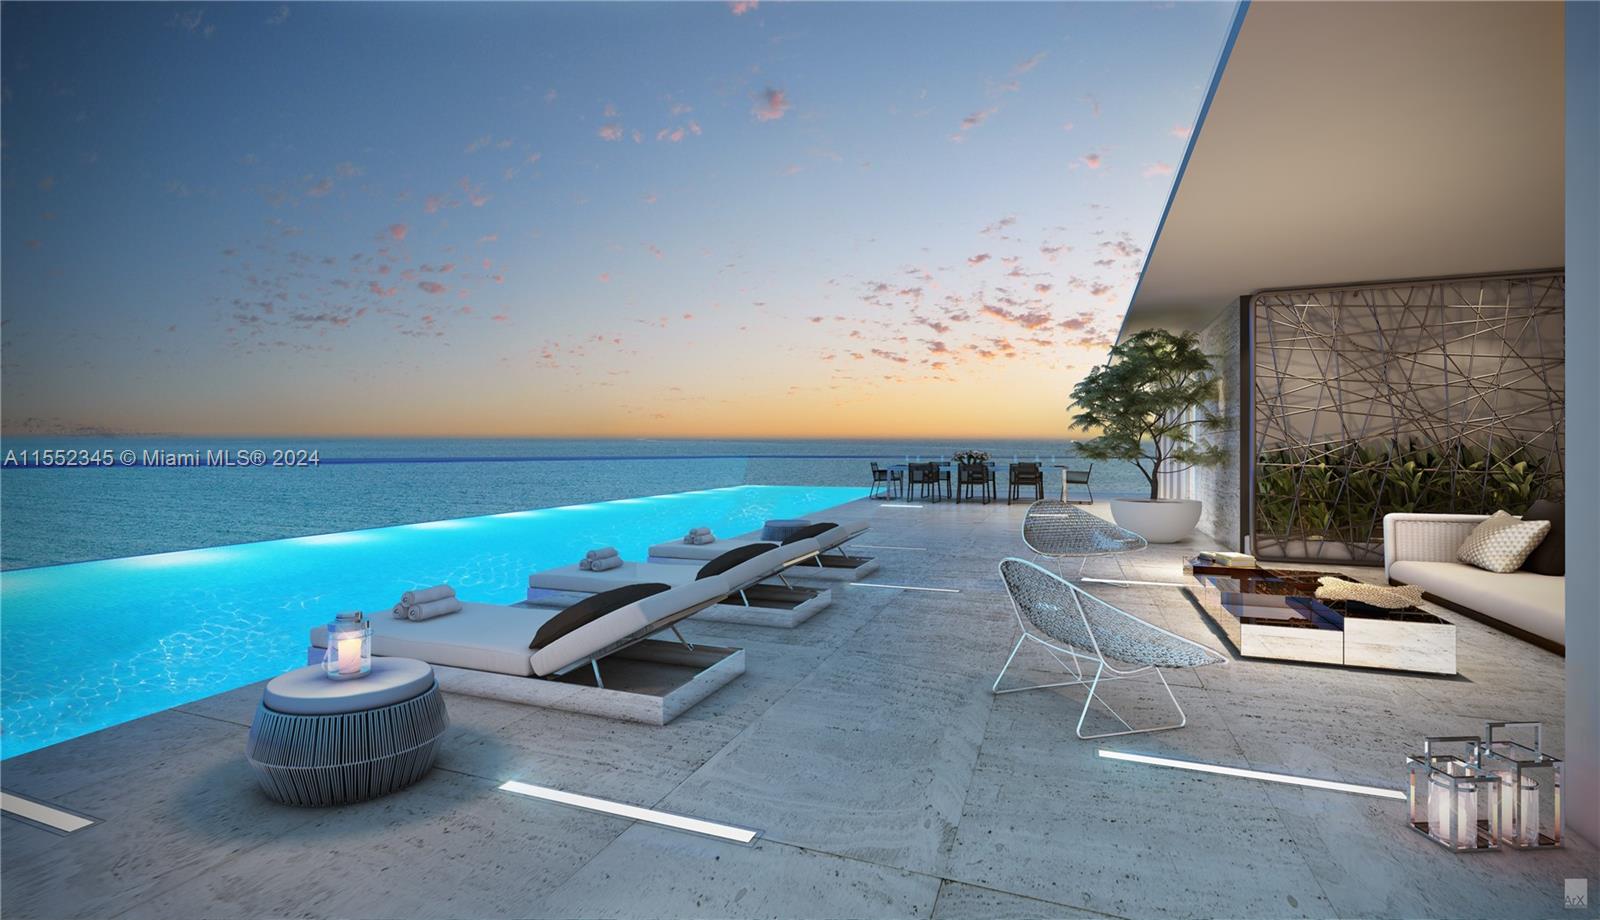 DEVELOPER INVENTORY: ONE-OF-A-KIND OCEANFRONT SOUTH PENTHOUSE. DECORATOR READY W/ PRIVATE BEACH CABANA: PRIVATE ROOF TOP w INFINITY EDGE SWIMMING POOL & SUMMER KITCHEN. 10,750 SF LIVING SPACE +8,615 SF OUTDOOR SPACE=19,365 SF. 3 Story flow thru residence offering direct Ocean & Intracoastal views. GYM, STAFF QUARTERS. Imported Snaidero Italian custom cabinetry & stone countertops, top-of-the line Gaggeneau appliances, walk-in closets. Turnberry Ocean Club Residences is a 54-story tower composed of 70,000 SF of luxury amenities w unrivaled, world-class service, including the 3-story private signature Sky Club w sunrise/sunset pools, private dining, health & wellness spa & entertainment.